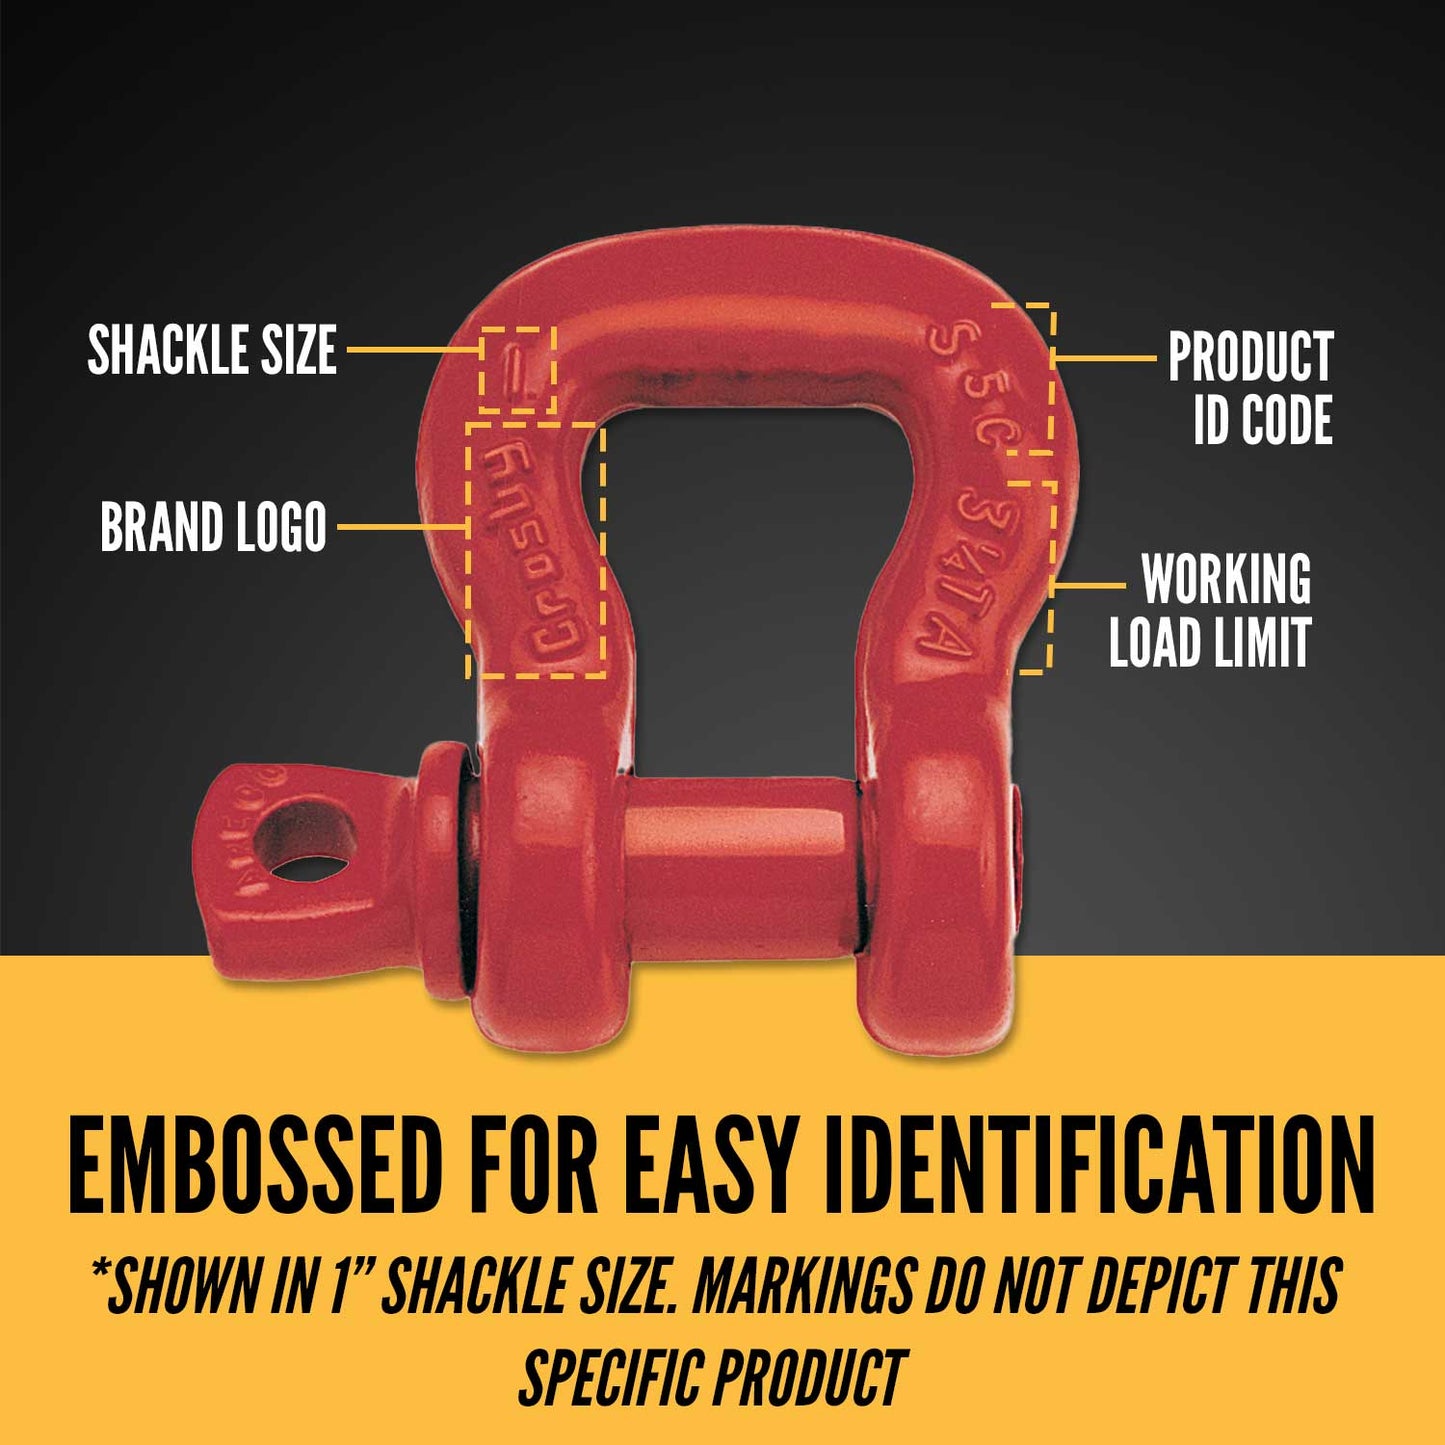 Crosby® Screw Pin Sling Saver Shackle | S-253 - 4"- 20.5 Ton embossed for easy identification